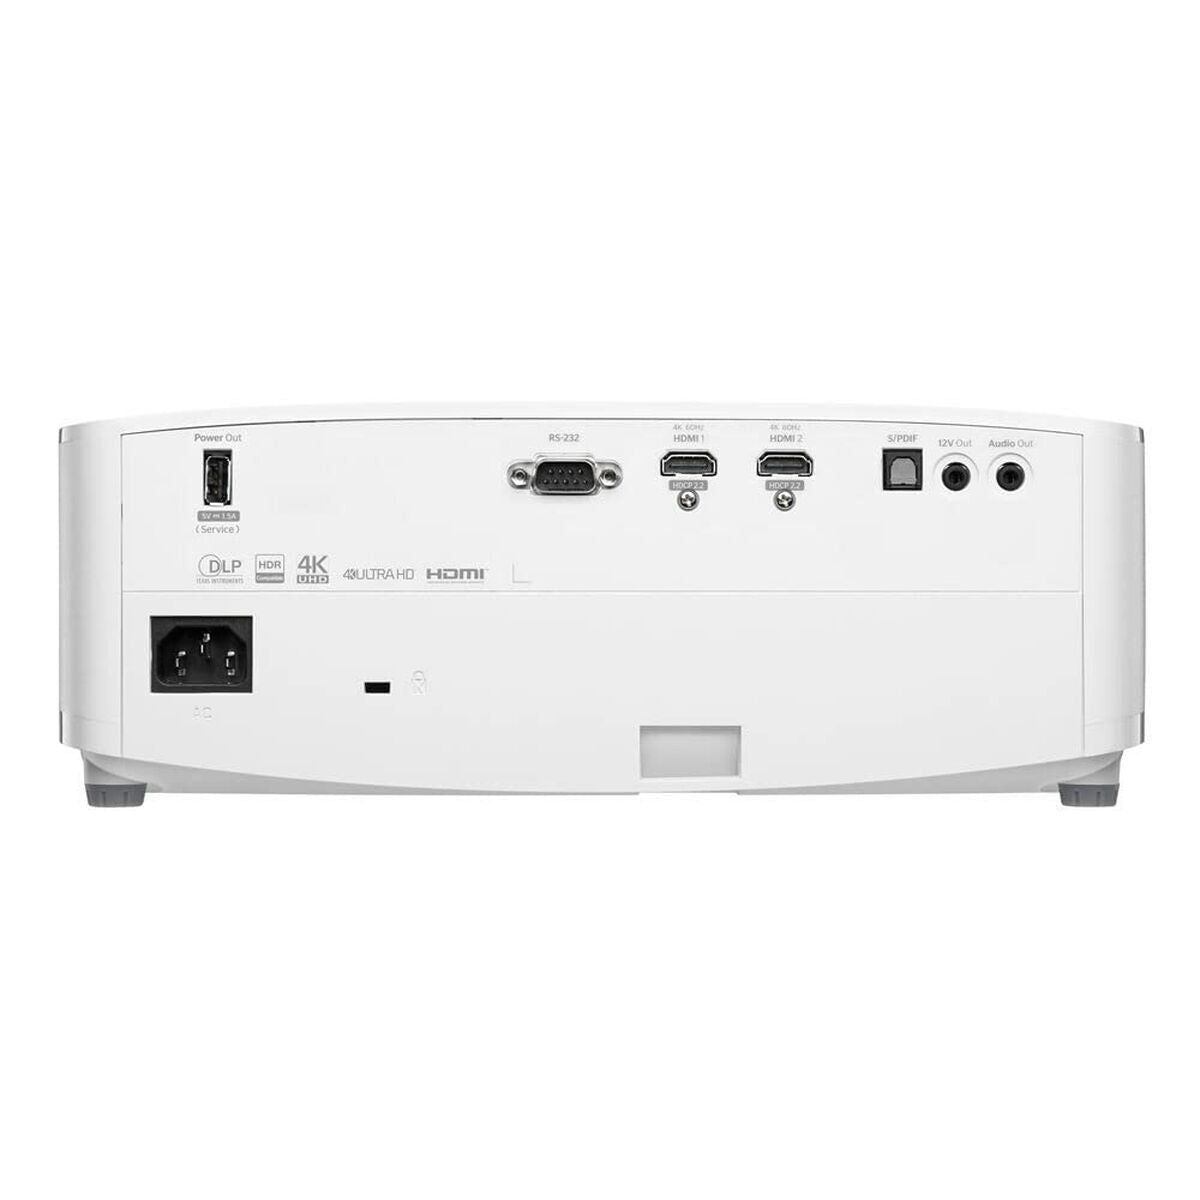 Projector Optoma UHD35STX, Optoma, Electronics, TV, Video and home cinema, projector-optoma-uhd35stx, Brand_Optoma, category-reference-2609, category-reference-2642, category-reference-2947, category-reference-t-18805, category-reference-t-19653, cinema and television, computers / peripherals, Condition_NEW, entertainment, office, Price_+ 1000, RiotNook